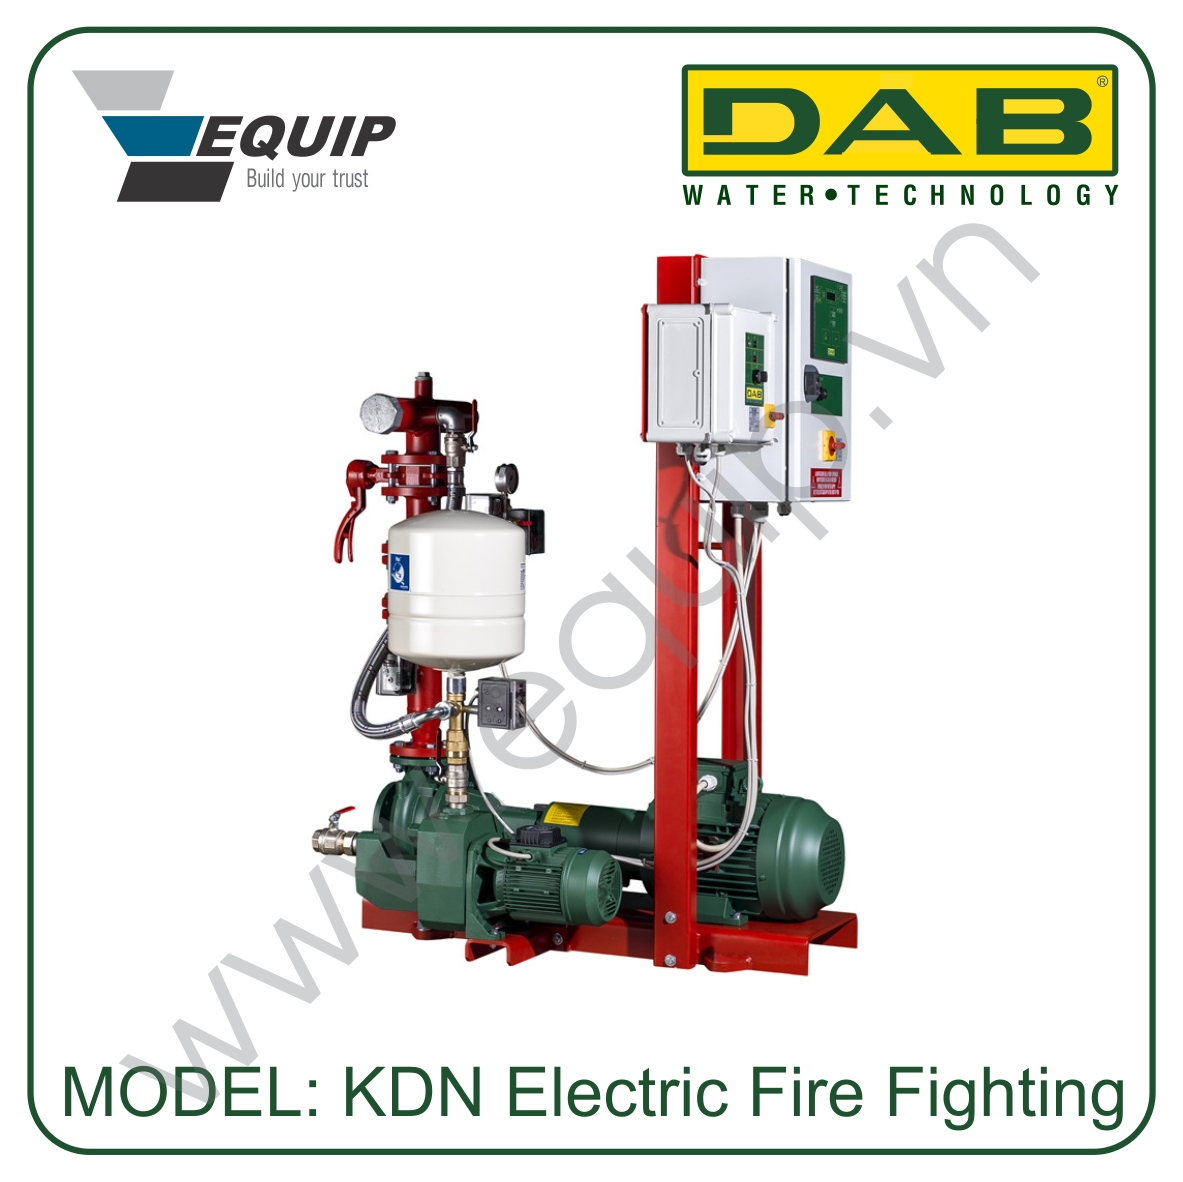 Fire fighting pumps for building DAB